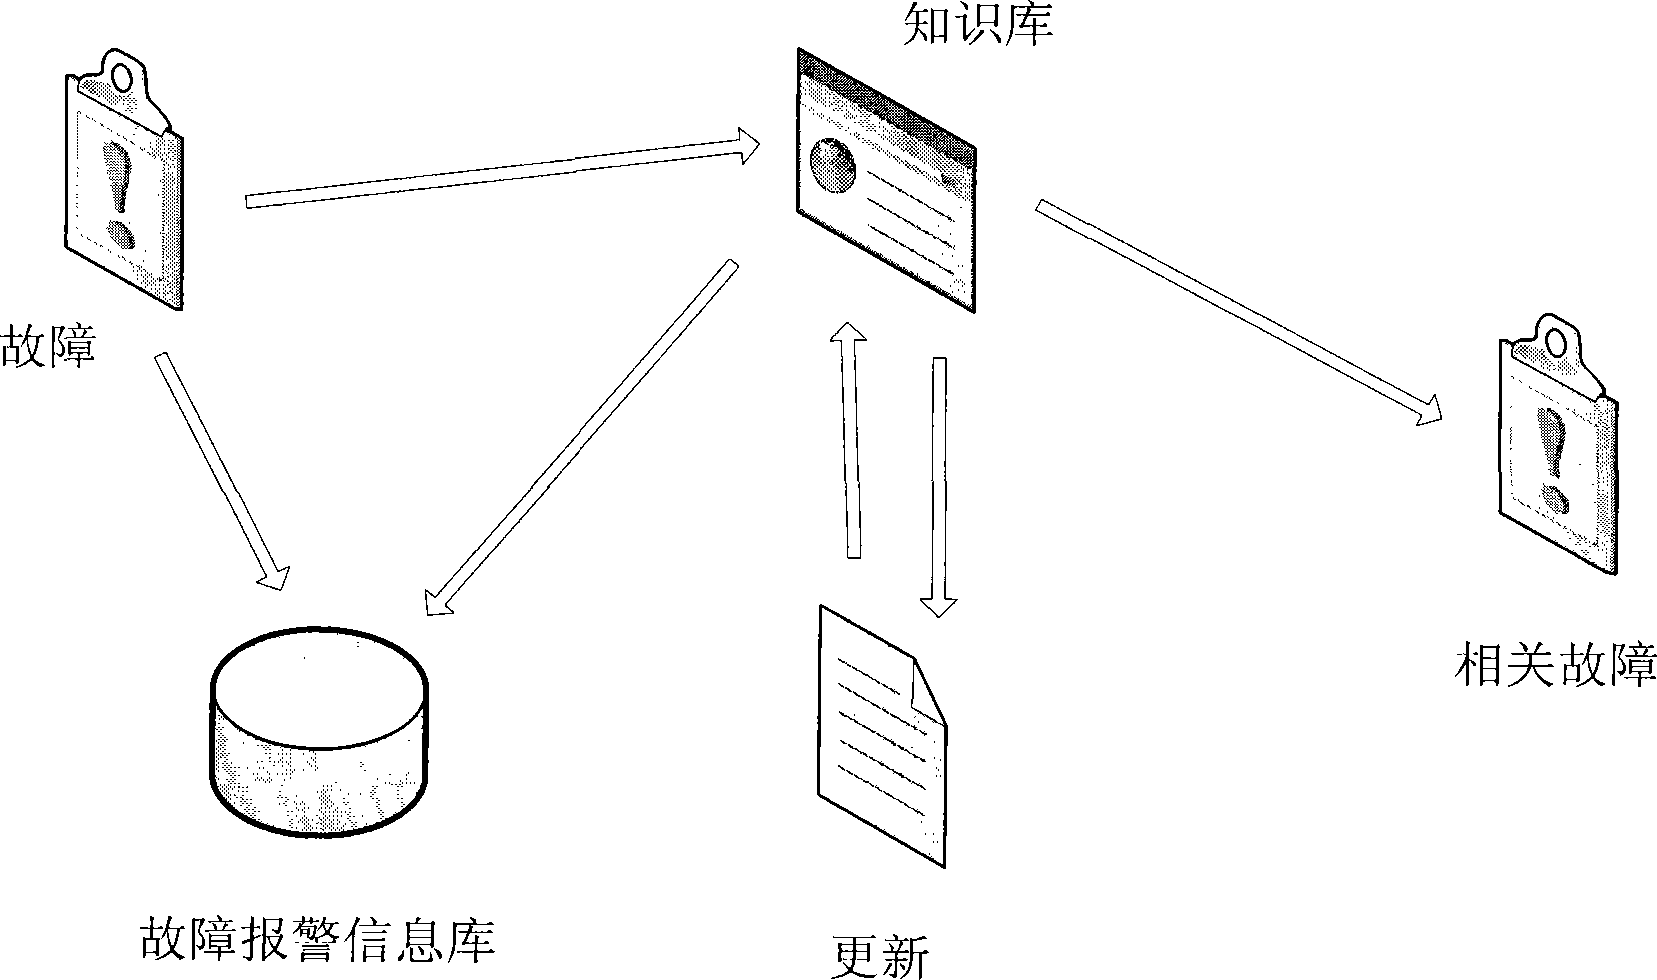 Equipment fault alarm, prediction and processing mechanism based on data mining